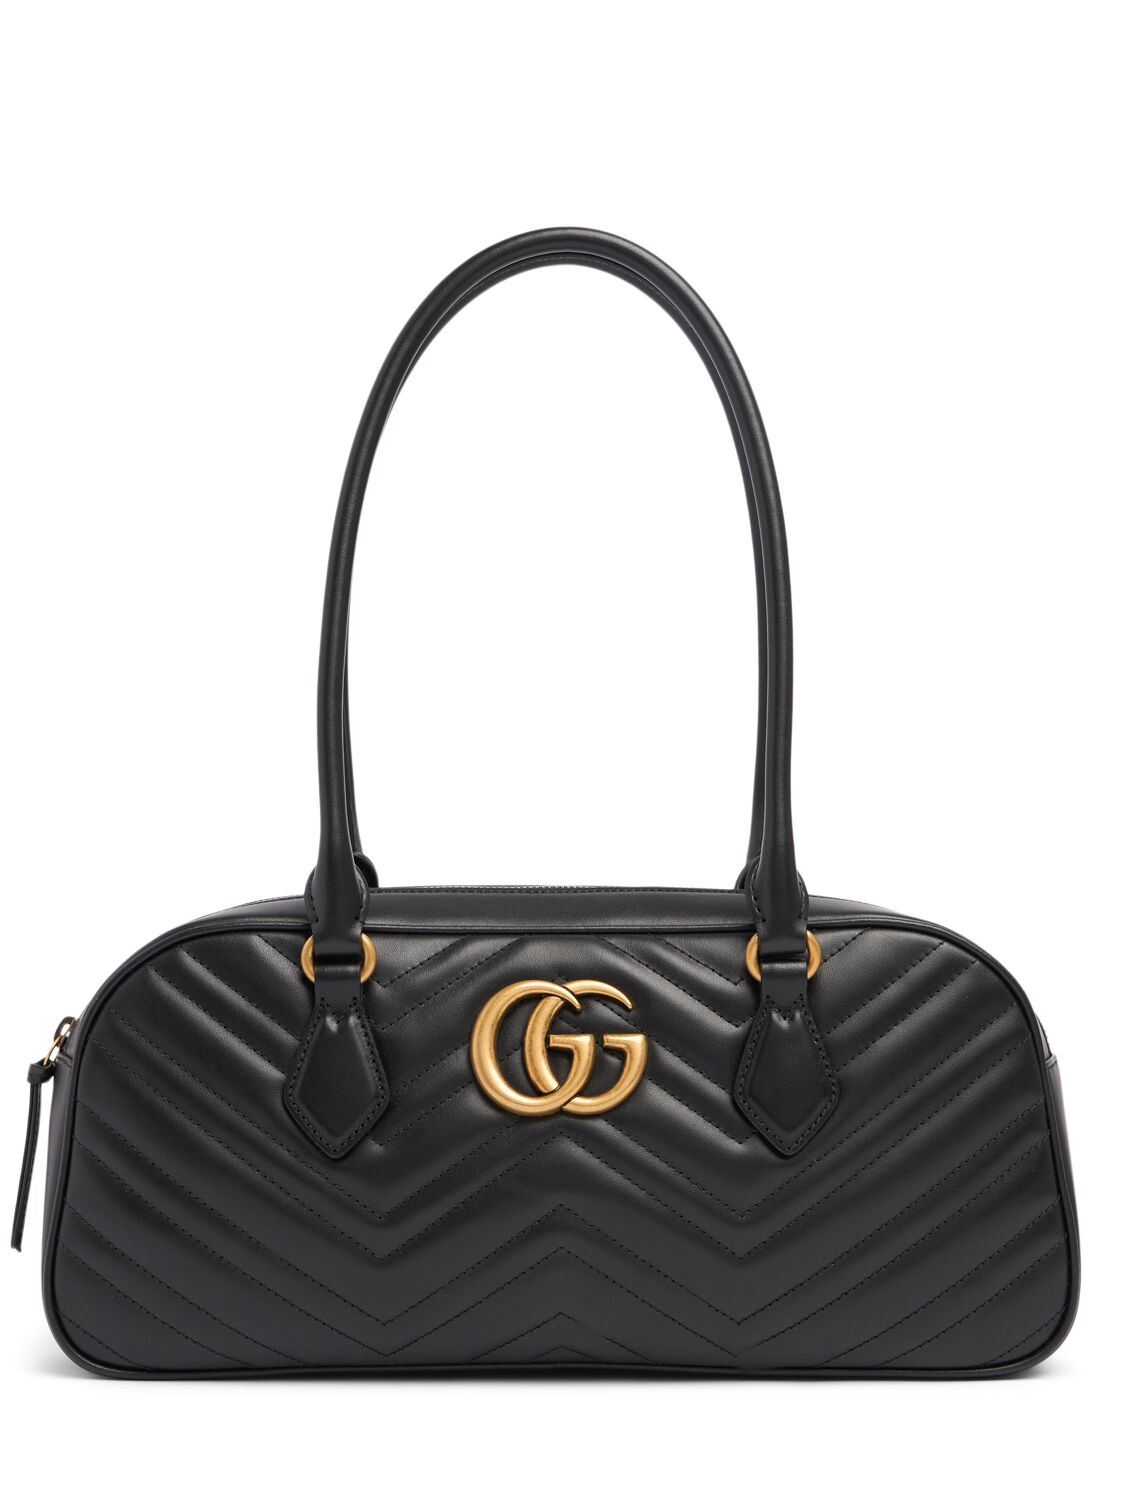 Image of Gg Marmont Leather Top Handle Bag